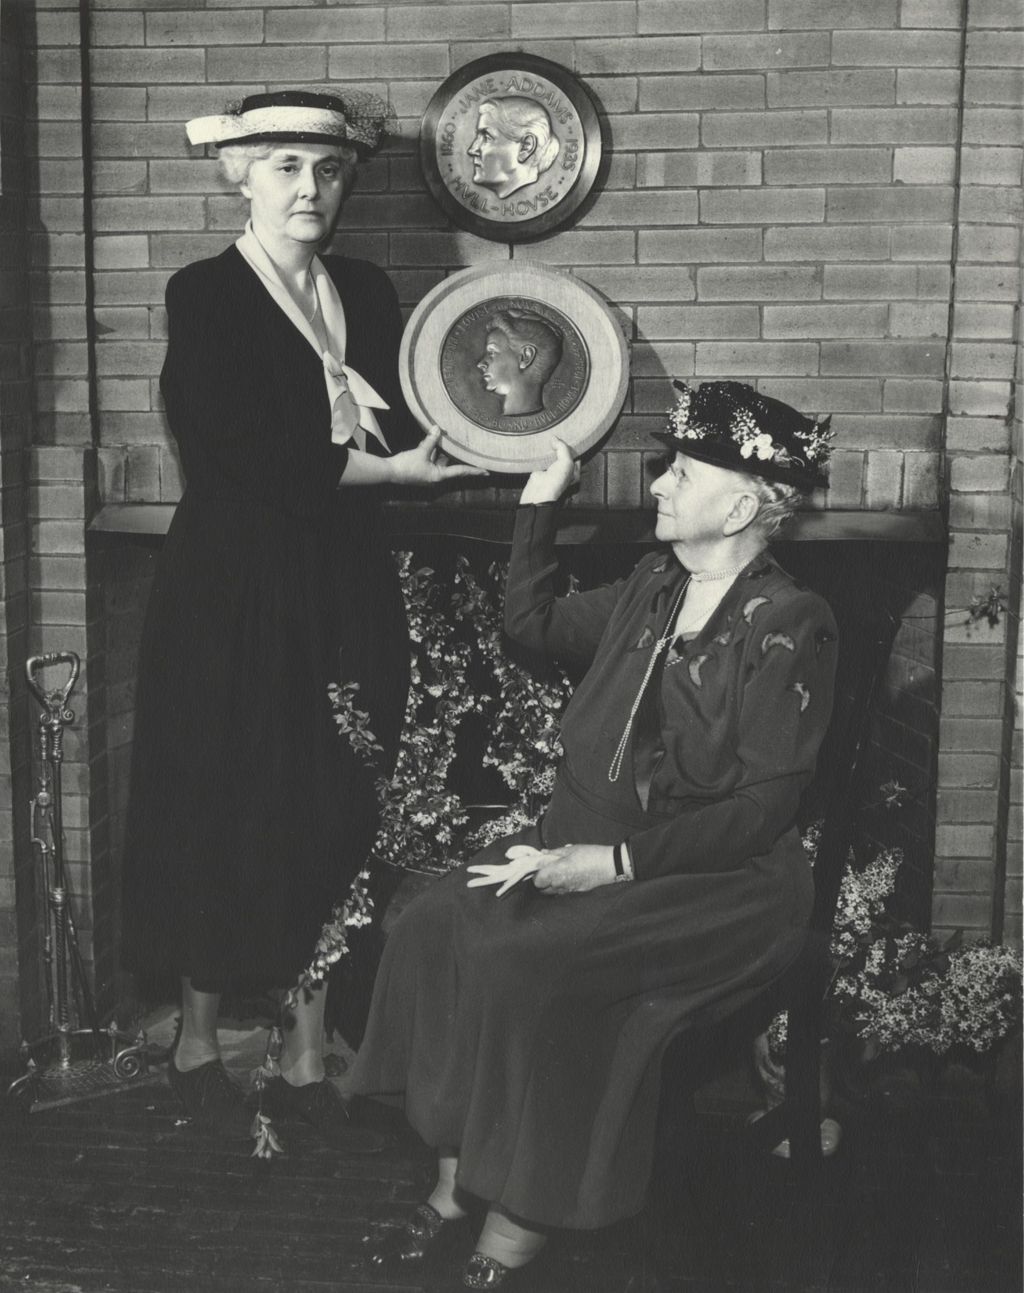 Miniature of Louise de Koven Bowen and Hull-House board president Alma Petersen holding a bas relief plaque in Bowen's honor during the 1949 Hull-House Associates Dinner